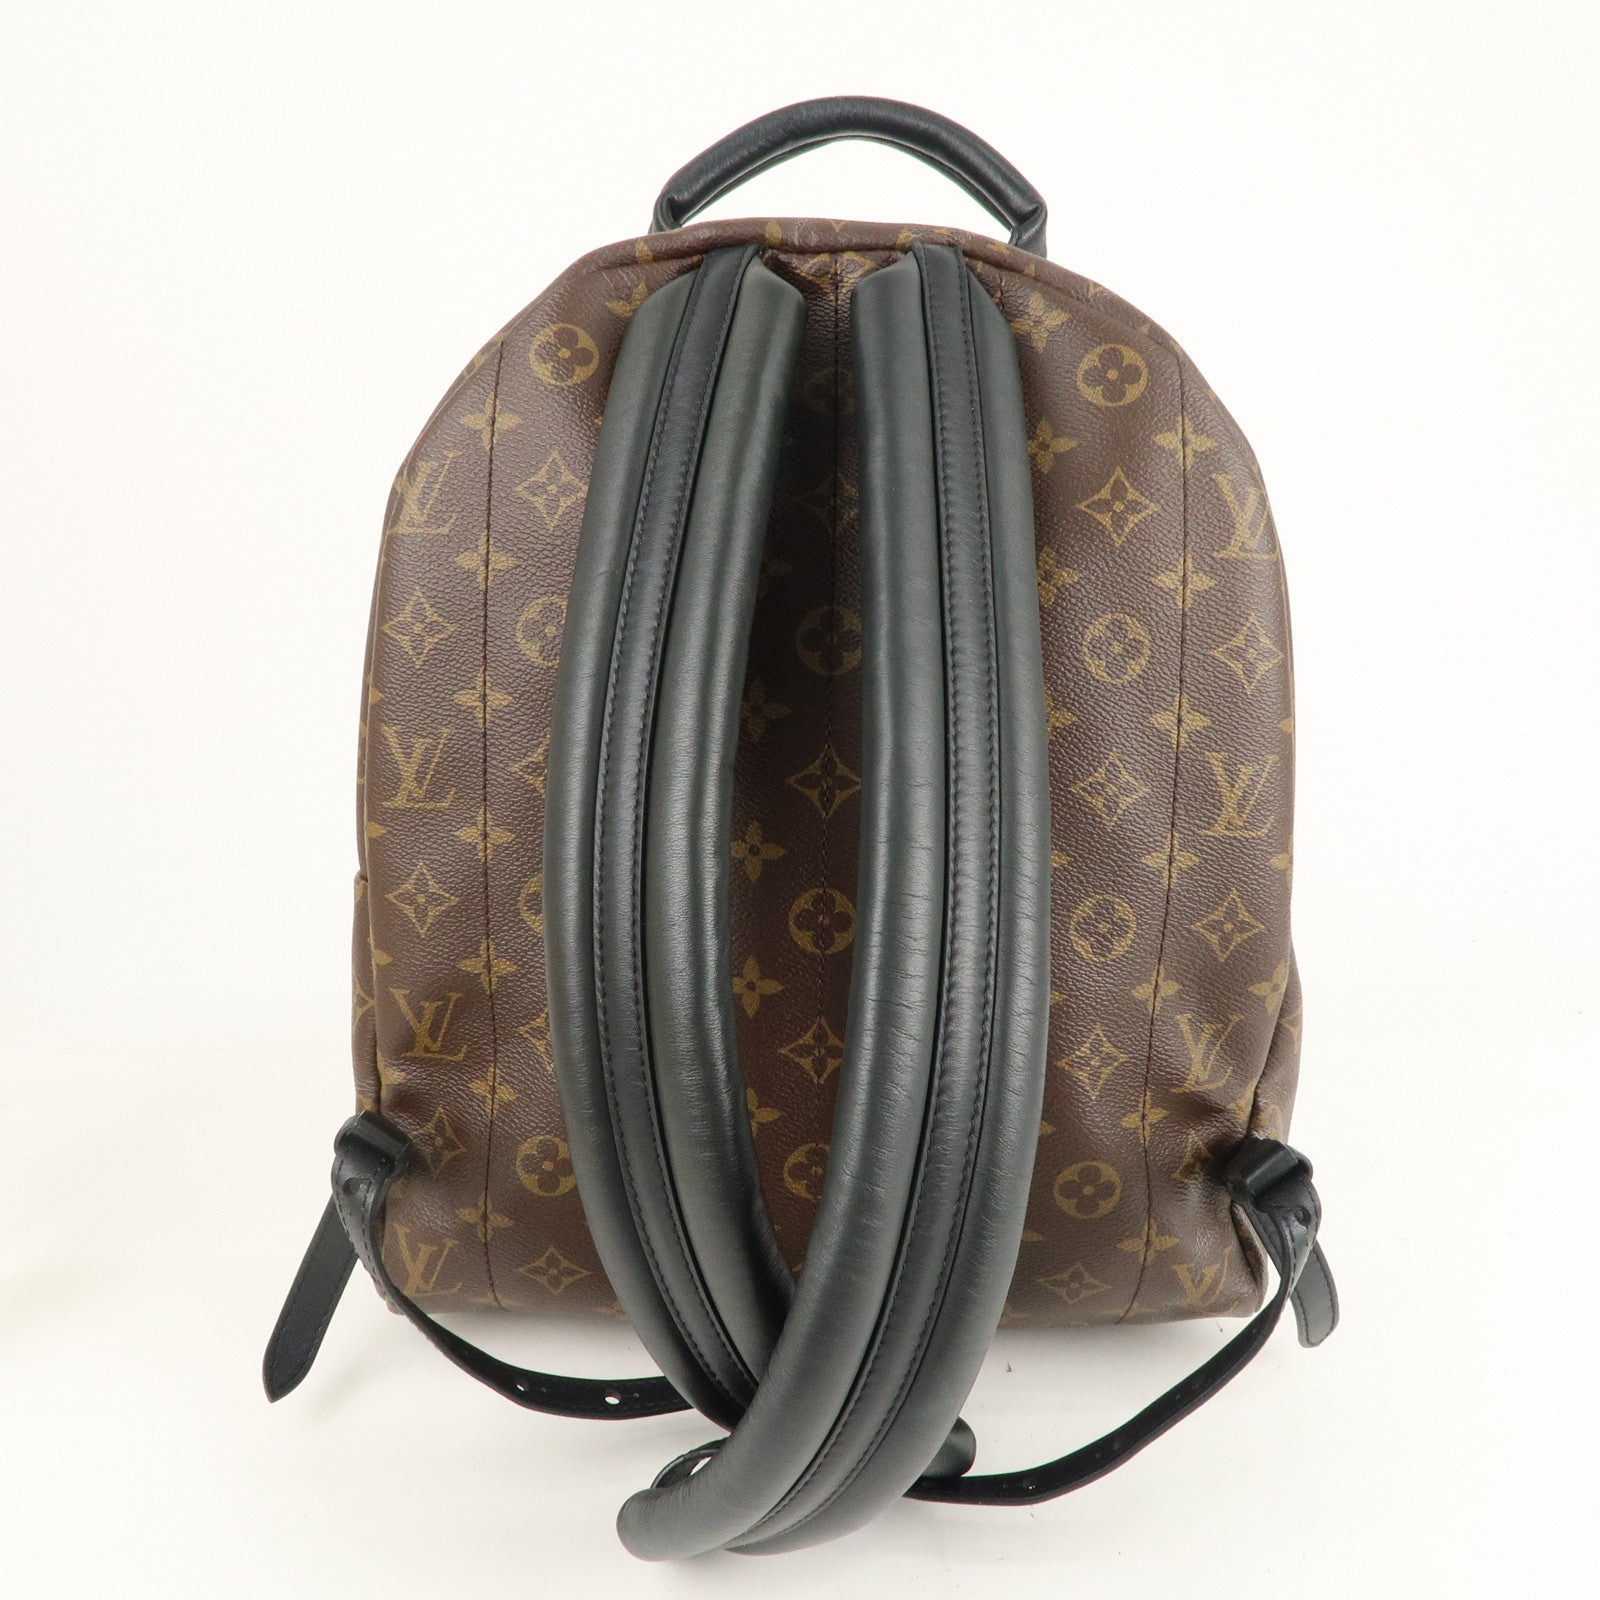 Shop Louis Vuitton MONOGRAM Only one in stock!PALM SPRINGS